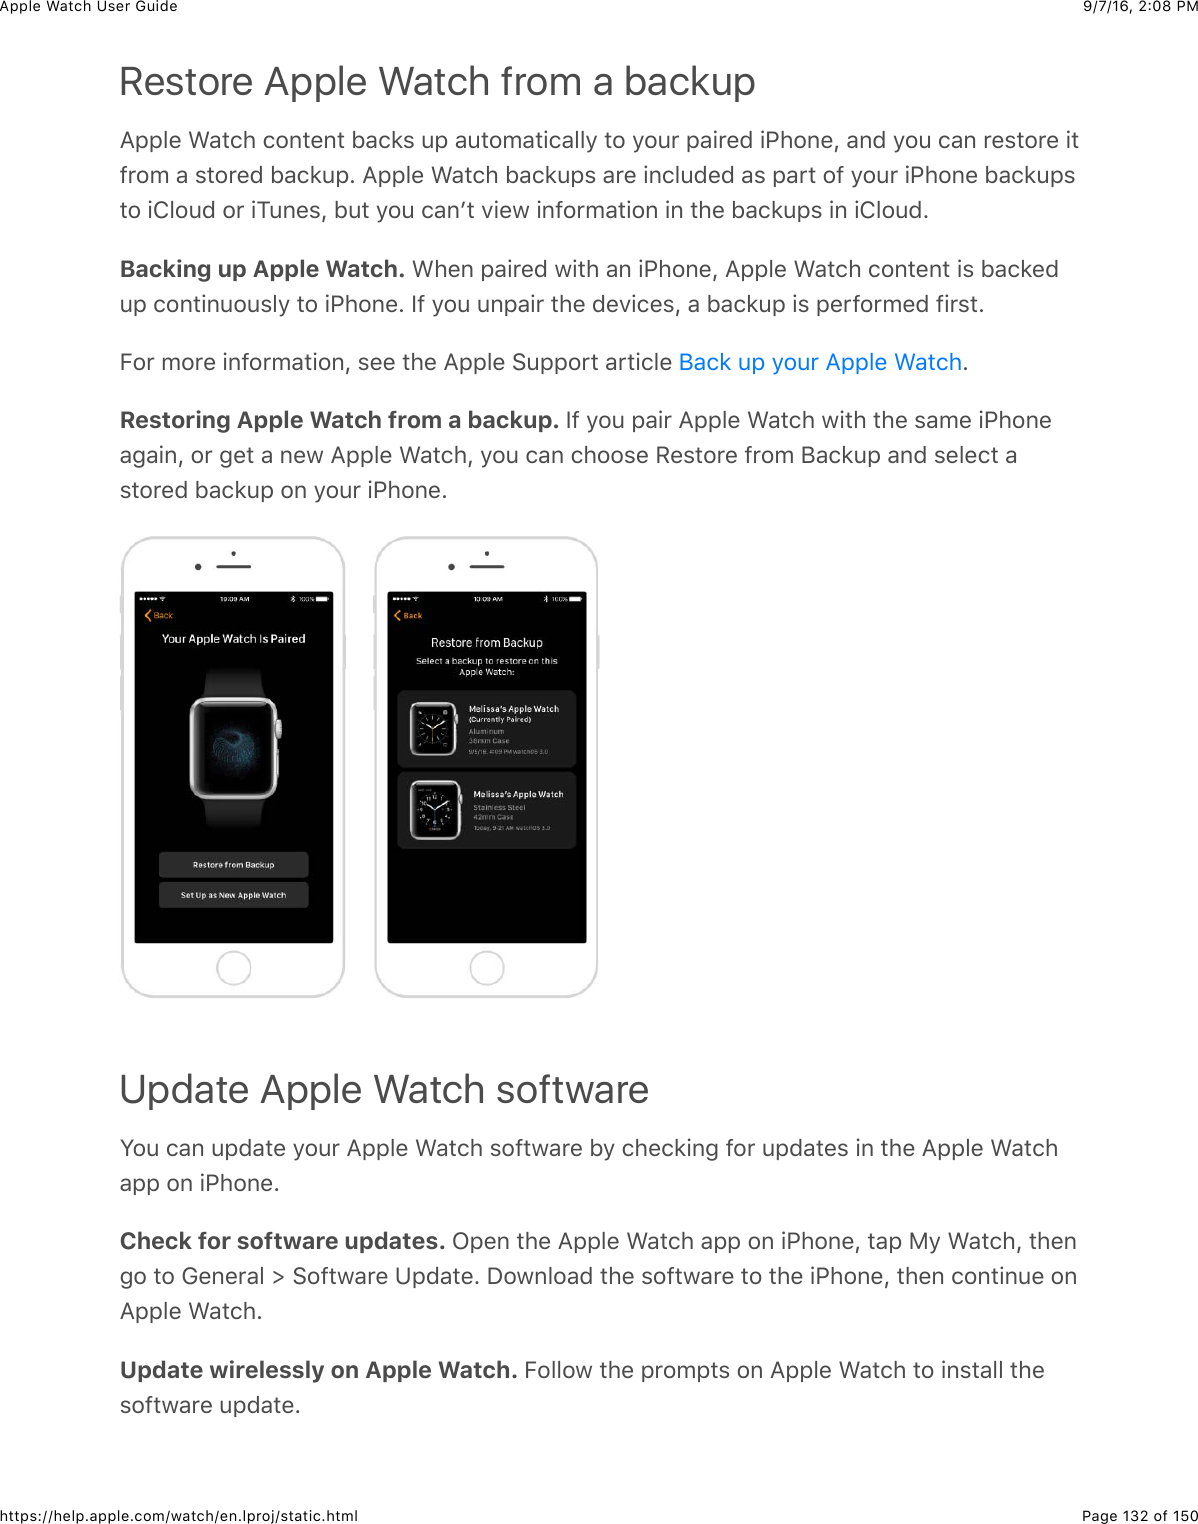 9/7/16, 2)08 PMApple Watch User GuidePage 132 of 150https://help.apple.com/watch/en.lproj/static.htmlRestore Apple Watch from a backup=22&quot;%&amp;&gt;&apos;3()&amp;(#,3%,3&amp;B&apos;(8$&amp;42&amp;&apos;43#5&apos;3+(&apos;&quot;&quot;/&amp;3#&amp;/#4*&amp;2&apos;+*%0&amp;+G)#,%J&amp;&apos;,0&amp;/#4&amp;(&apos;,&amp;*%$3#*%&amp;+3@*#5&amp;&apos;&amp;$3#*%0&amp;B&apos;(842C&amp;=22&quot;%&amp;&gt;&apos;3()&amp;B&apos;(842$&amp;&apos;*%&amp;+,(&quot;40%0&amp;&apos;$&amp;2&apos;*3&amp;#@&amp;/#4*&amp;+G)#,%&amp;B&apos;(842$3#&amp;+!&quot;#40&amp;#*&amp;+14,%$J&amp;B43&amp;/#4&amp;(&apos;,W3&amp;.+%7&amp;+,@#*5&apos;3+#,&amp;+,&amp;3)%&amp;B&apos;(842$&amp;+,&amp;+!&quot;#40CBacking up Apple Watch. &gt;)%,&amp;2&apos;+*%0&amp;7+3)&amp;&apos;,&amp;+G)#,%J&amp;=22&quot;%&amp;&gt;&apos;3()&amp;(#,3%,3&amp;+$&amp;B&apos;(8%042&amp;(#,3+,4#4$&quot;/&amp;3#&amp;+G)#,%C&amp;Y@&amp;/#4&amp;4,2&apos;+*&amp;3)%&amp;0%.+(%$J&amp;&apos;&amp;B&apos;(842&amp;+$&amp;2%*@#*5%0&amp;@+*$3CE#*&amp;5#*%&amp;+,@#*5&apos;3+#,J&amp;$%%&amp;3)%&amp;=22&quot;%&amp;6422#*3&amp;&apos;*3+(&quot;%&amp; CRestoring Apple Watch from a backup. Y@&amp;/#4&amp;2&apos;+*&amp;=22&quot;%&amp;&gt;&apos;3()&amp;7+3)&amp;3)%&amp;$&apos;5%&amp;+G)#,%&apos;-&apos;+,J&amp;#*&amp;-%3&amp;&apos;&amp;,%7&amp;=22&quot;%&amp;&gt;&apos;3()J&amp;/#4&amp;(&apos;,&amp;()##$%&amp;H%$3#*%&amp;@*#5&amp;;&apos;(842&amp;&apos;,0&amp;$%&quot;%(3&amp;&apos;$3#*%0&amp;B&apos;(842&amp;#,&amp;/#4*&amp;+G)#,%CUpdate Apple Watch softwareS#4&amp;(&apos;,&amp;420&apos;3%&amp;/#4*&amp;=22&quot;%&amp;&gt;&apos;3()&amp;$#@37&apos;*%&amp;B/&amp;()%(8+,-&amp;@#*&amp;420&apos;3%$&amp;+,&amp;3)%&amp;=22&quot;%&amp;&gt;&apos;3()&apos;22&amp;#,&amp;+G)#,%CCheck for software updates. L2%,&amp;3)%&amp;=22&quot;%&amp;&gt;&apos;3()&amp;&apos;22&amp;#,&amp;+G)#,%J&amp;3&apos;2&amp;F/&amp;&gt;&apos;3()J&amp;3)%,-#&amp;3#&amp;D%,%*&apos;&quot;&amp;d&amp;6#@37&apos;*%&amp;K20&apos;3%C&amp;I#7,&quot;#&apos;0&amp;3)%&amp;$#@37&apos;*%&amp;3#&amp;3)%&amp;+G)#,%J&amp;3)%,&amp;(#,3+,4%&amp;#,=22&quot;%&amp;&gt;&apos;3()CUpdate wirelessly on Apple Watch. E#&quot;&quot;#7&amp;3)%&amp;2*#523$&amp;#,&amp;=22&quot;%&amp;&gt;&apos;3()&amp;3#&amp;+,$3&apos;&quot;&quot;&amp;3)%$#@37&apos;*%&amp;420&apos;3%C;&apos;(8&amp;42&amp;/#4*&amp;=22&quot;%&amp;&gt;&apos;3()